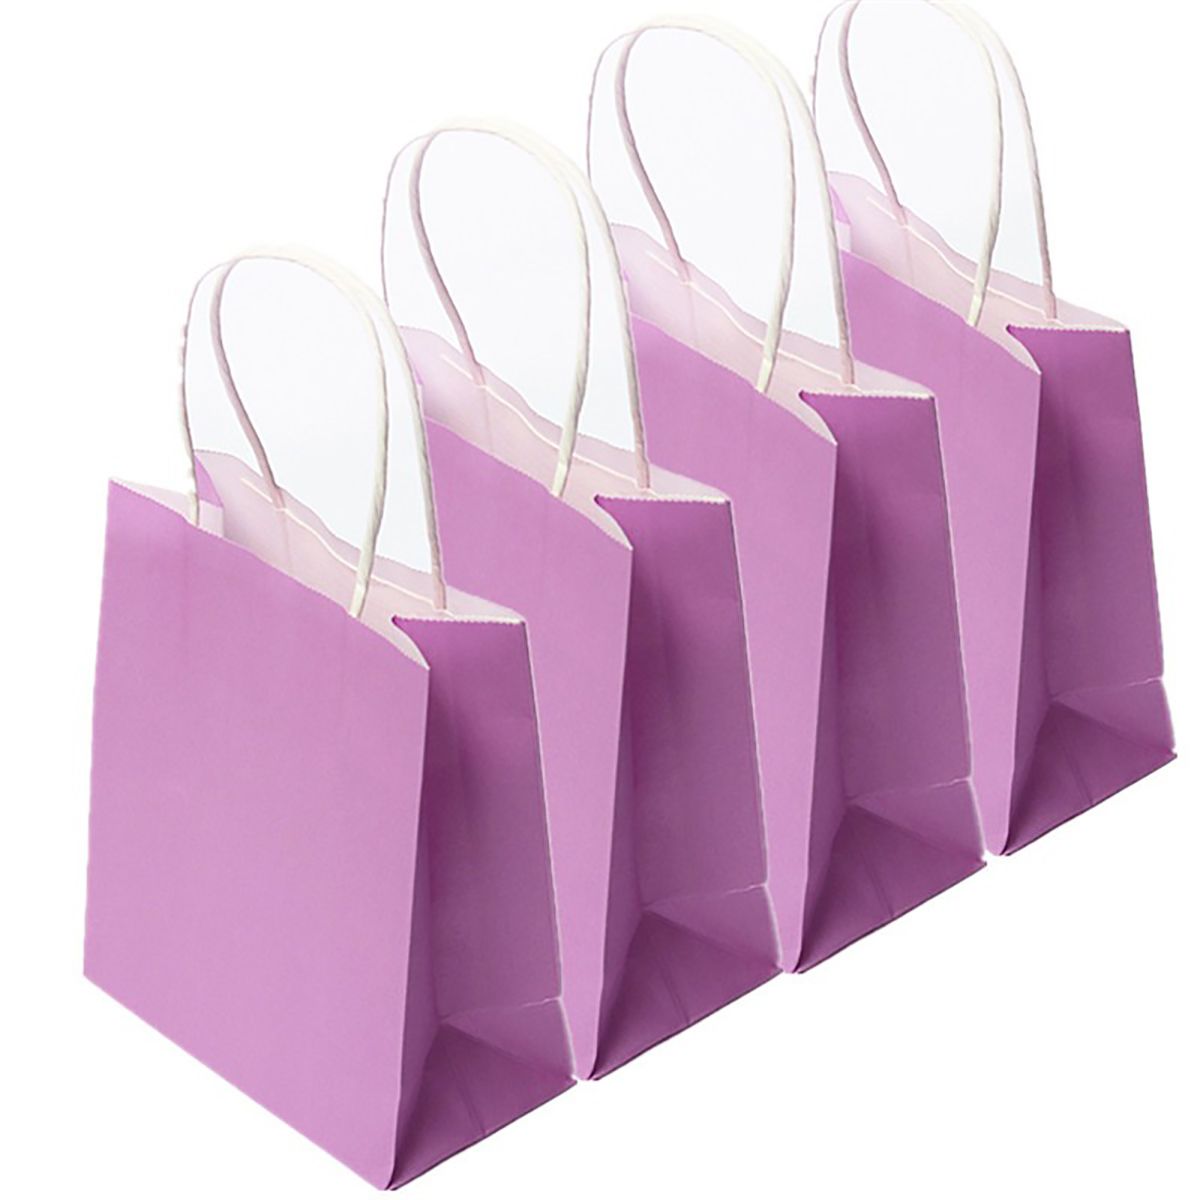 Colorful-Kraft-Paper-Gift-Bag-Wedding-Party-Handle-Paper-Gift-Bags-987091